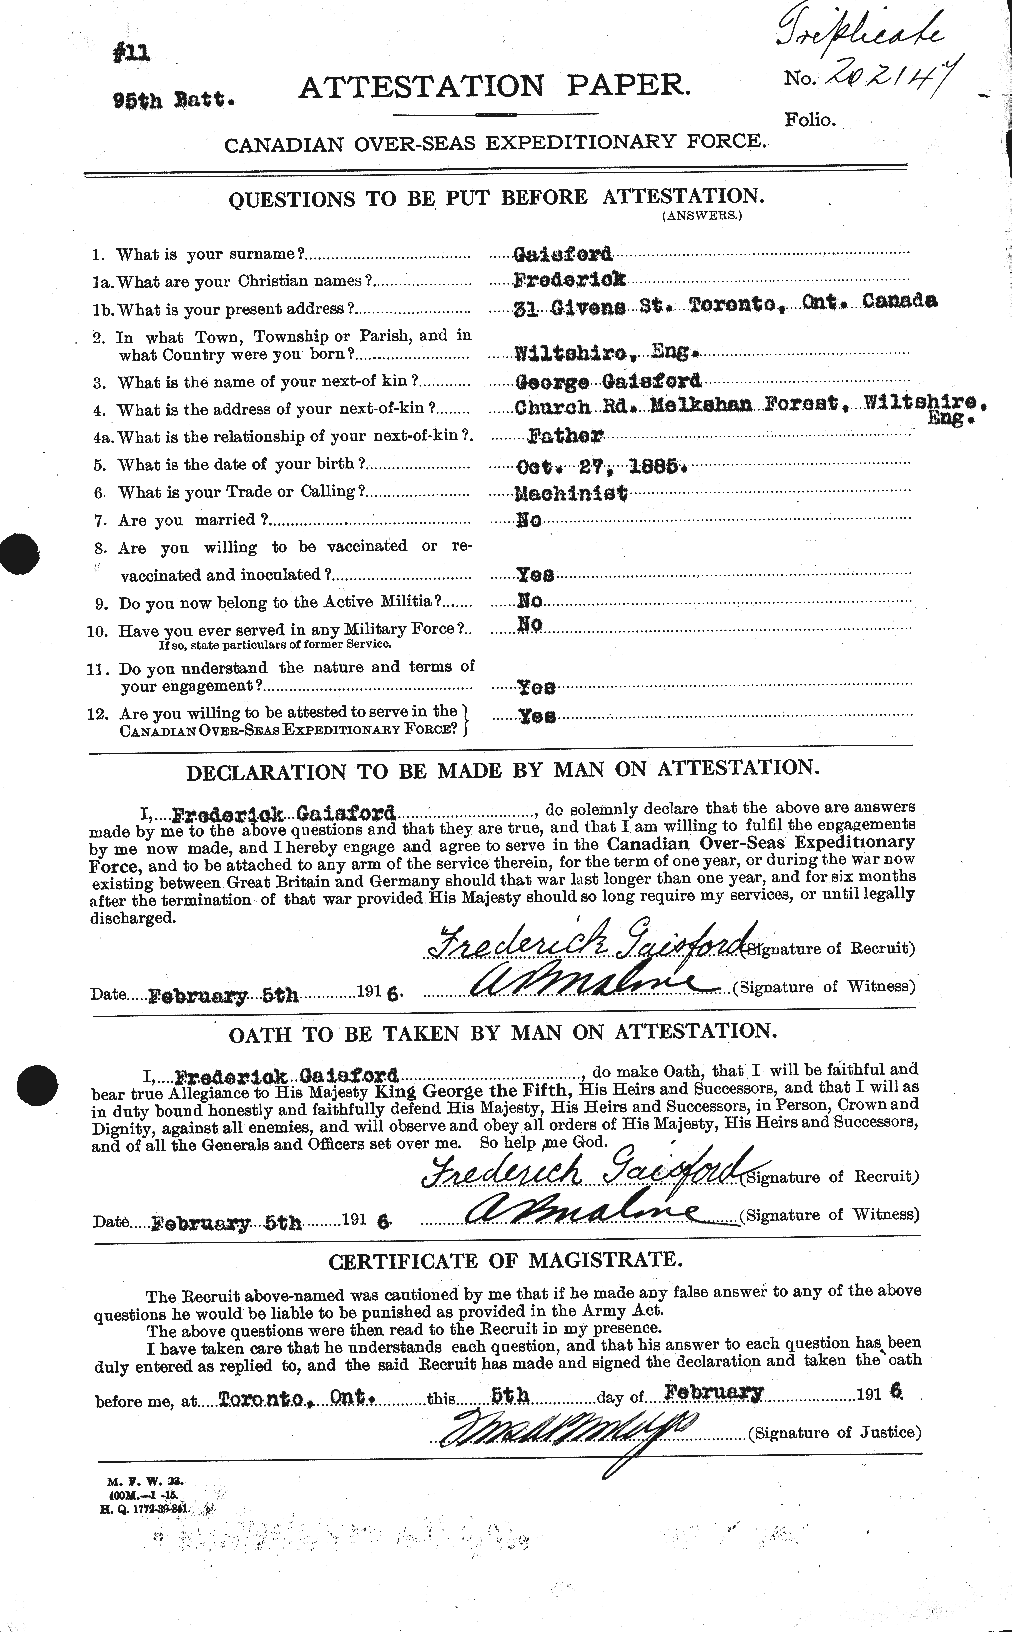 Personnel Records of the First World War - CEF 341127a